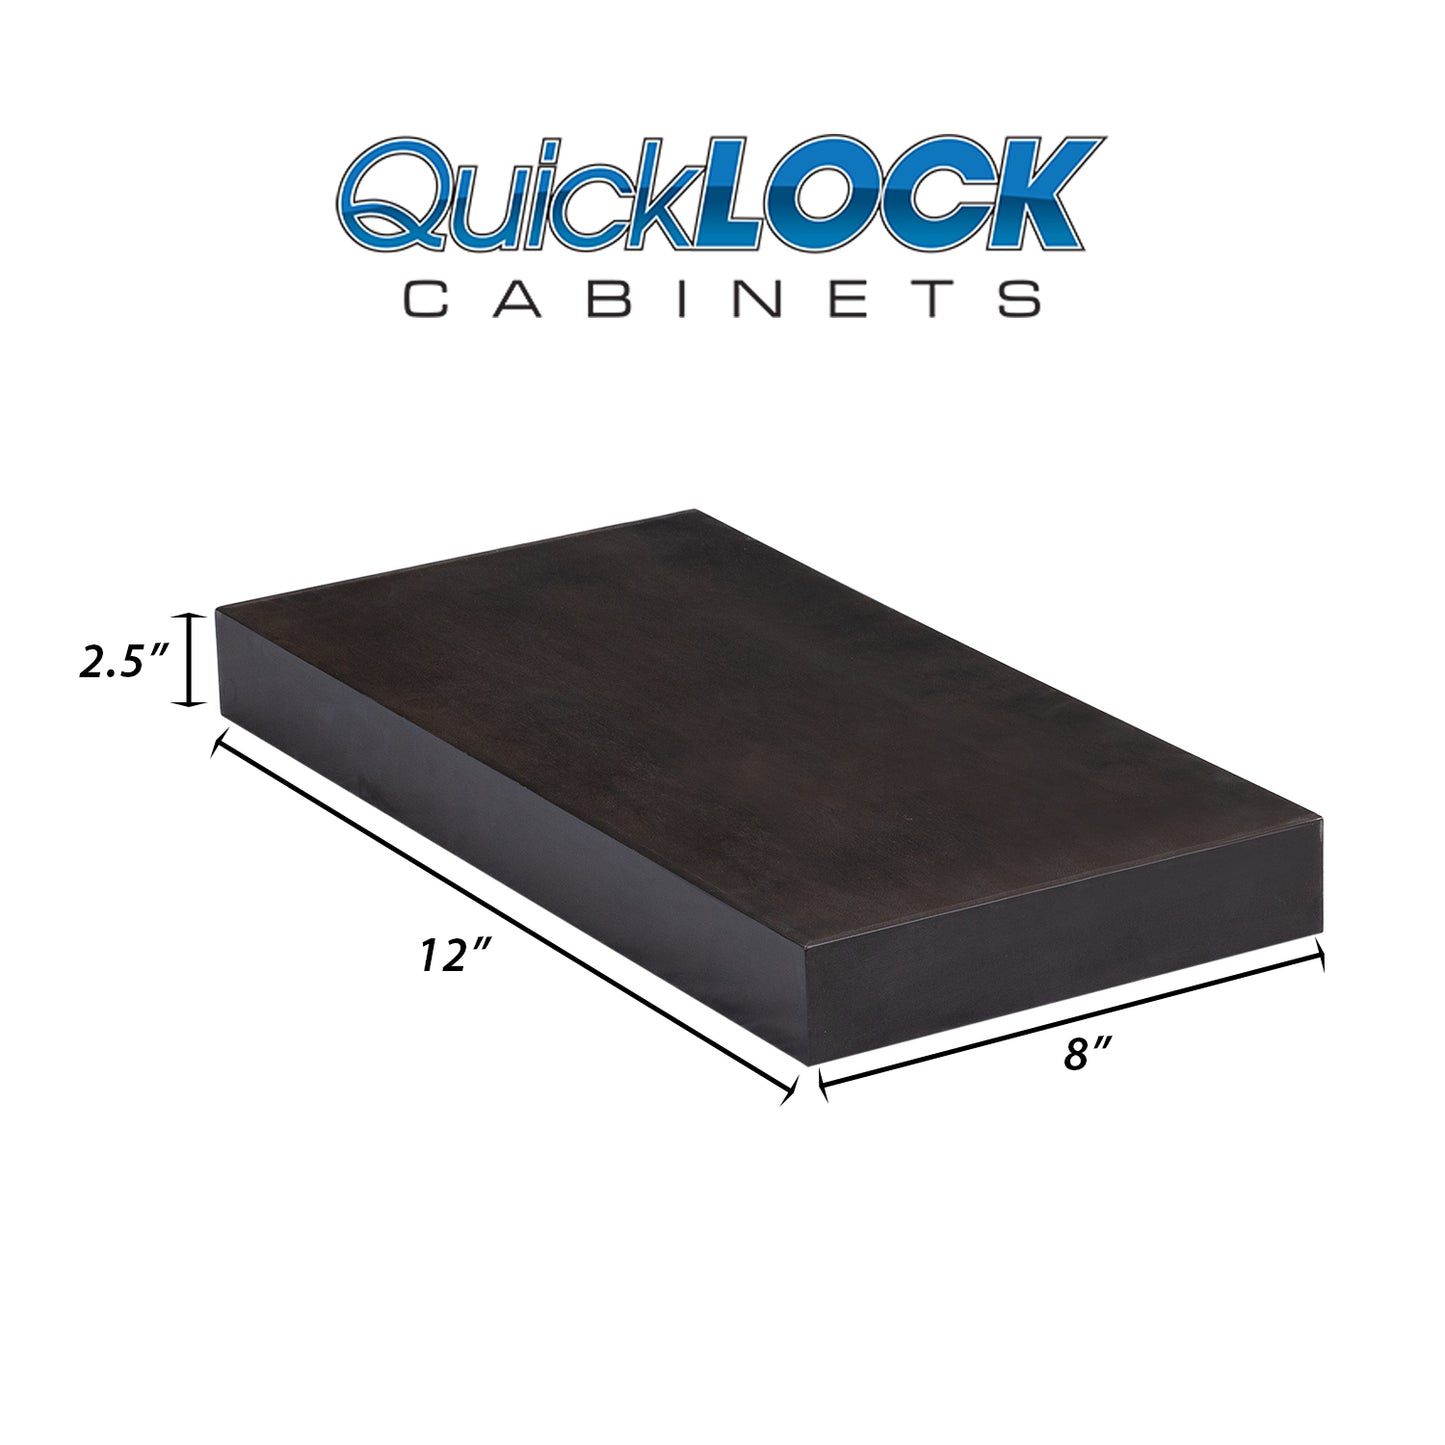 Quicklock Cabinets Floating Shelves | 2.5" Thick | Espresso Stain, 8" D x 12" W x 2.5" H | American Made | Hardwood Bracket | Complete Shelf Unit